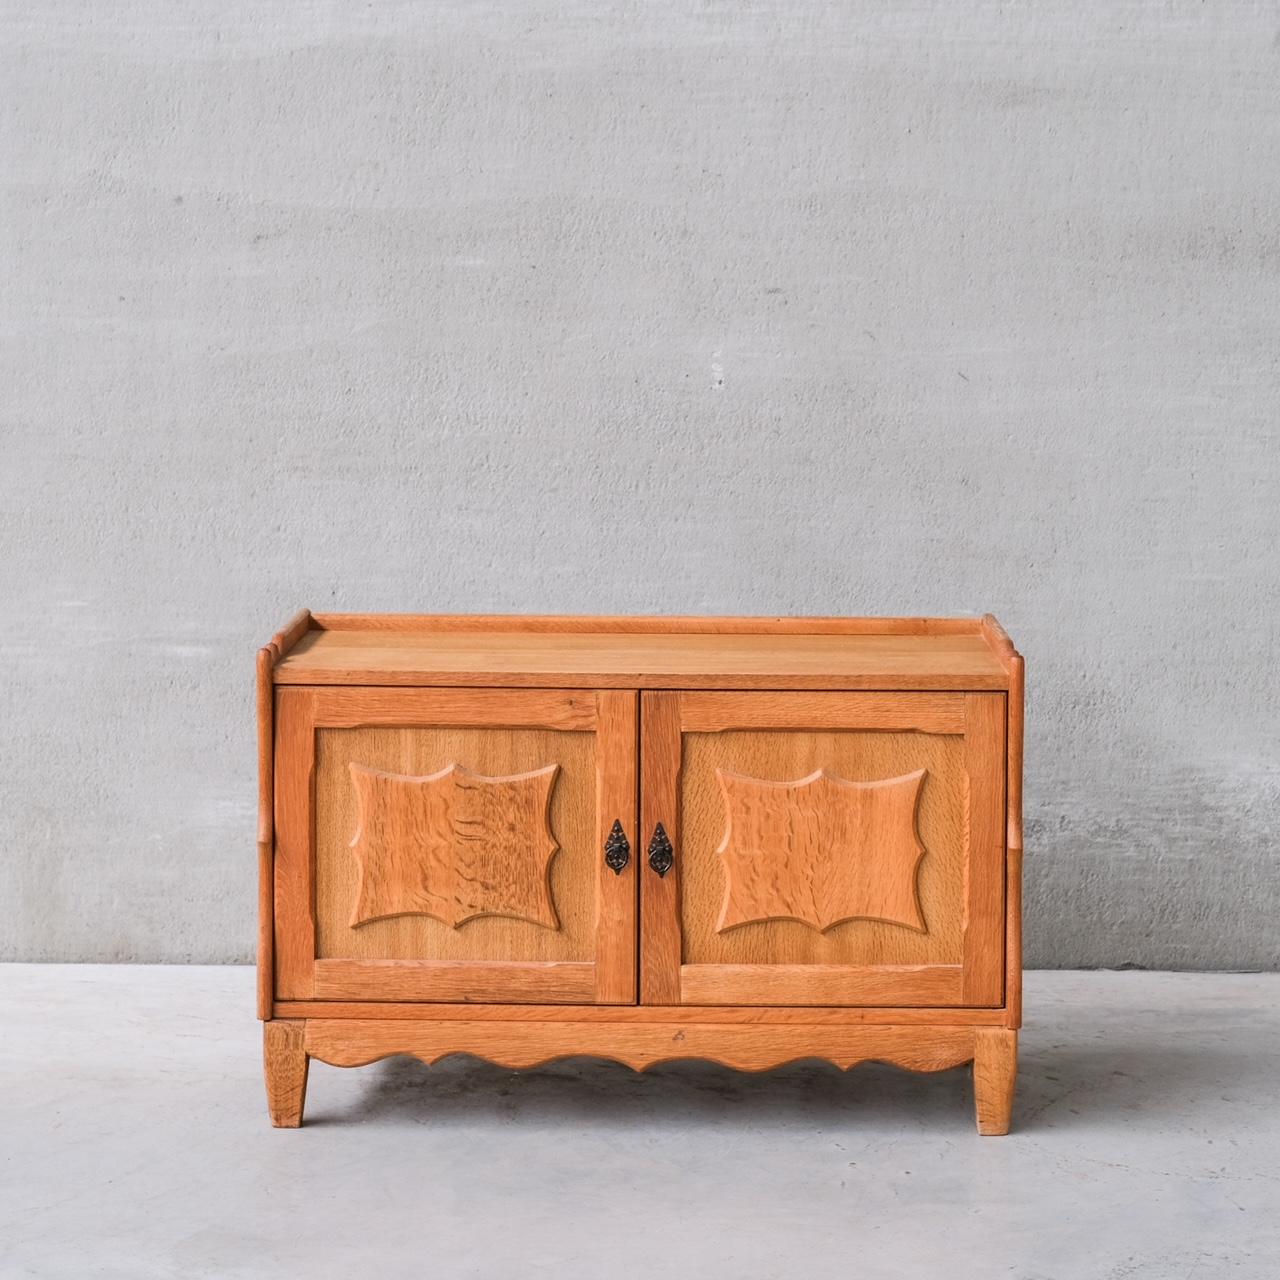 Mid-20th Century Oak Danish Mid-Century Bedside Cabinets or Sideboards attr. to Henning Kjaernulf For Sale